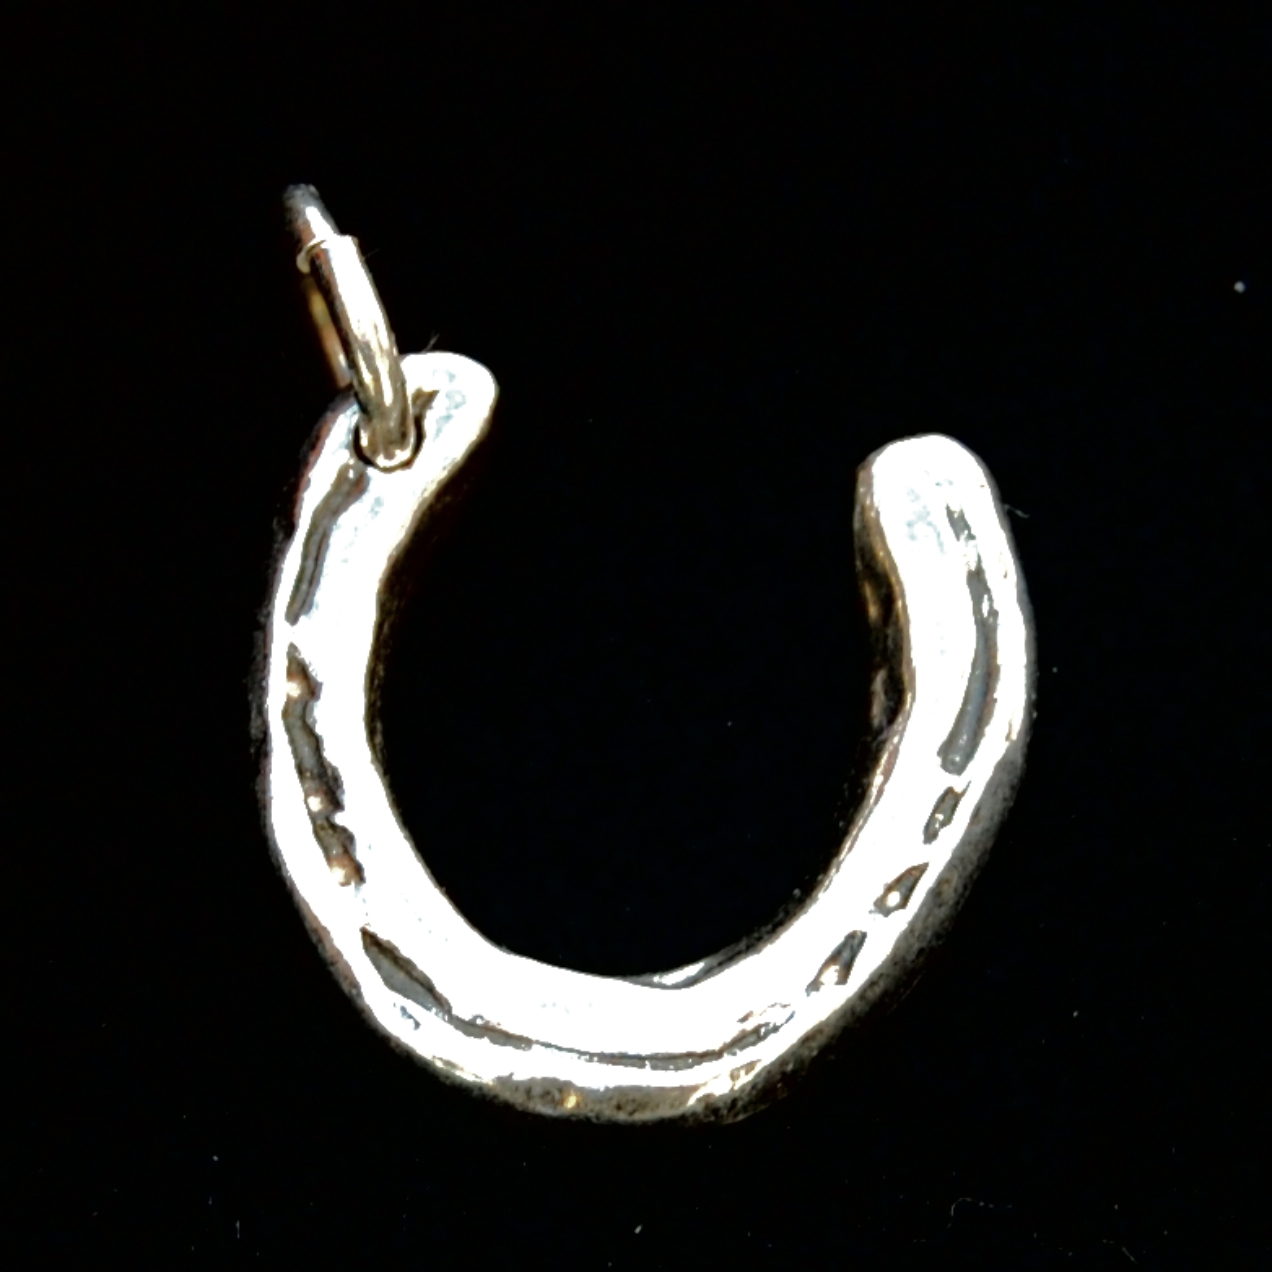 Your horse's unique shoe recreated in a small silver charm with initial inscribed on the back.